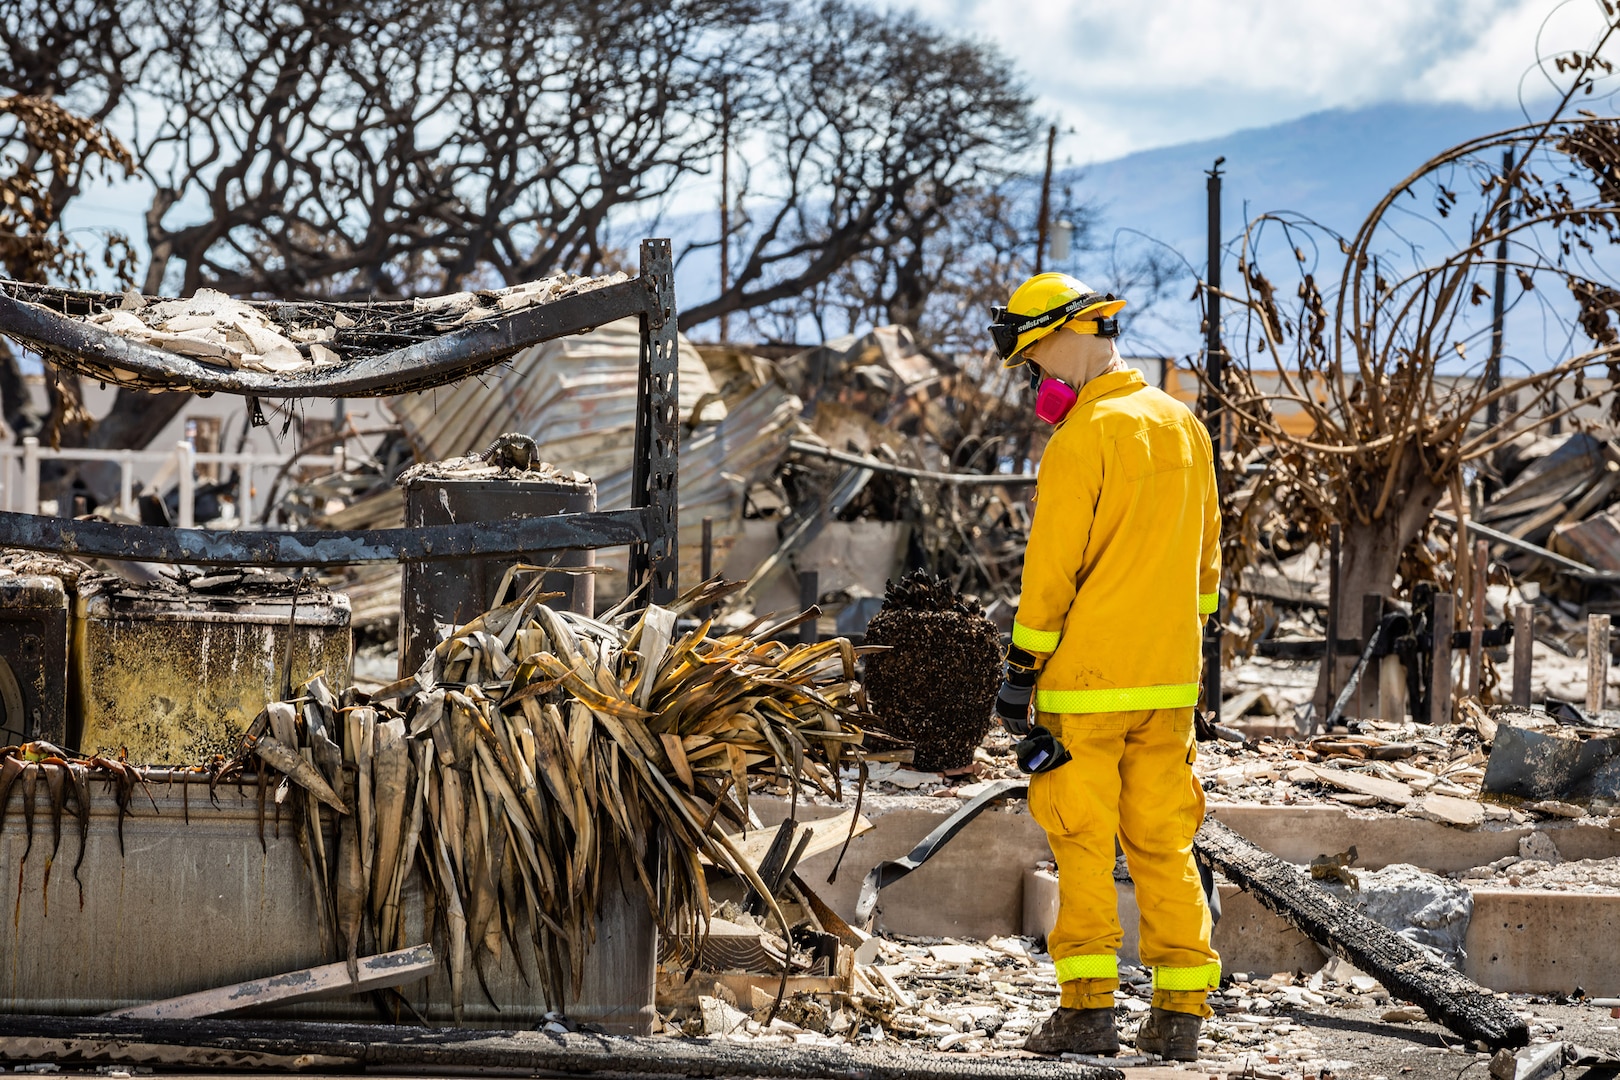 Service members conduct search operations of areas damaged by wildfires.